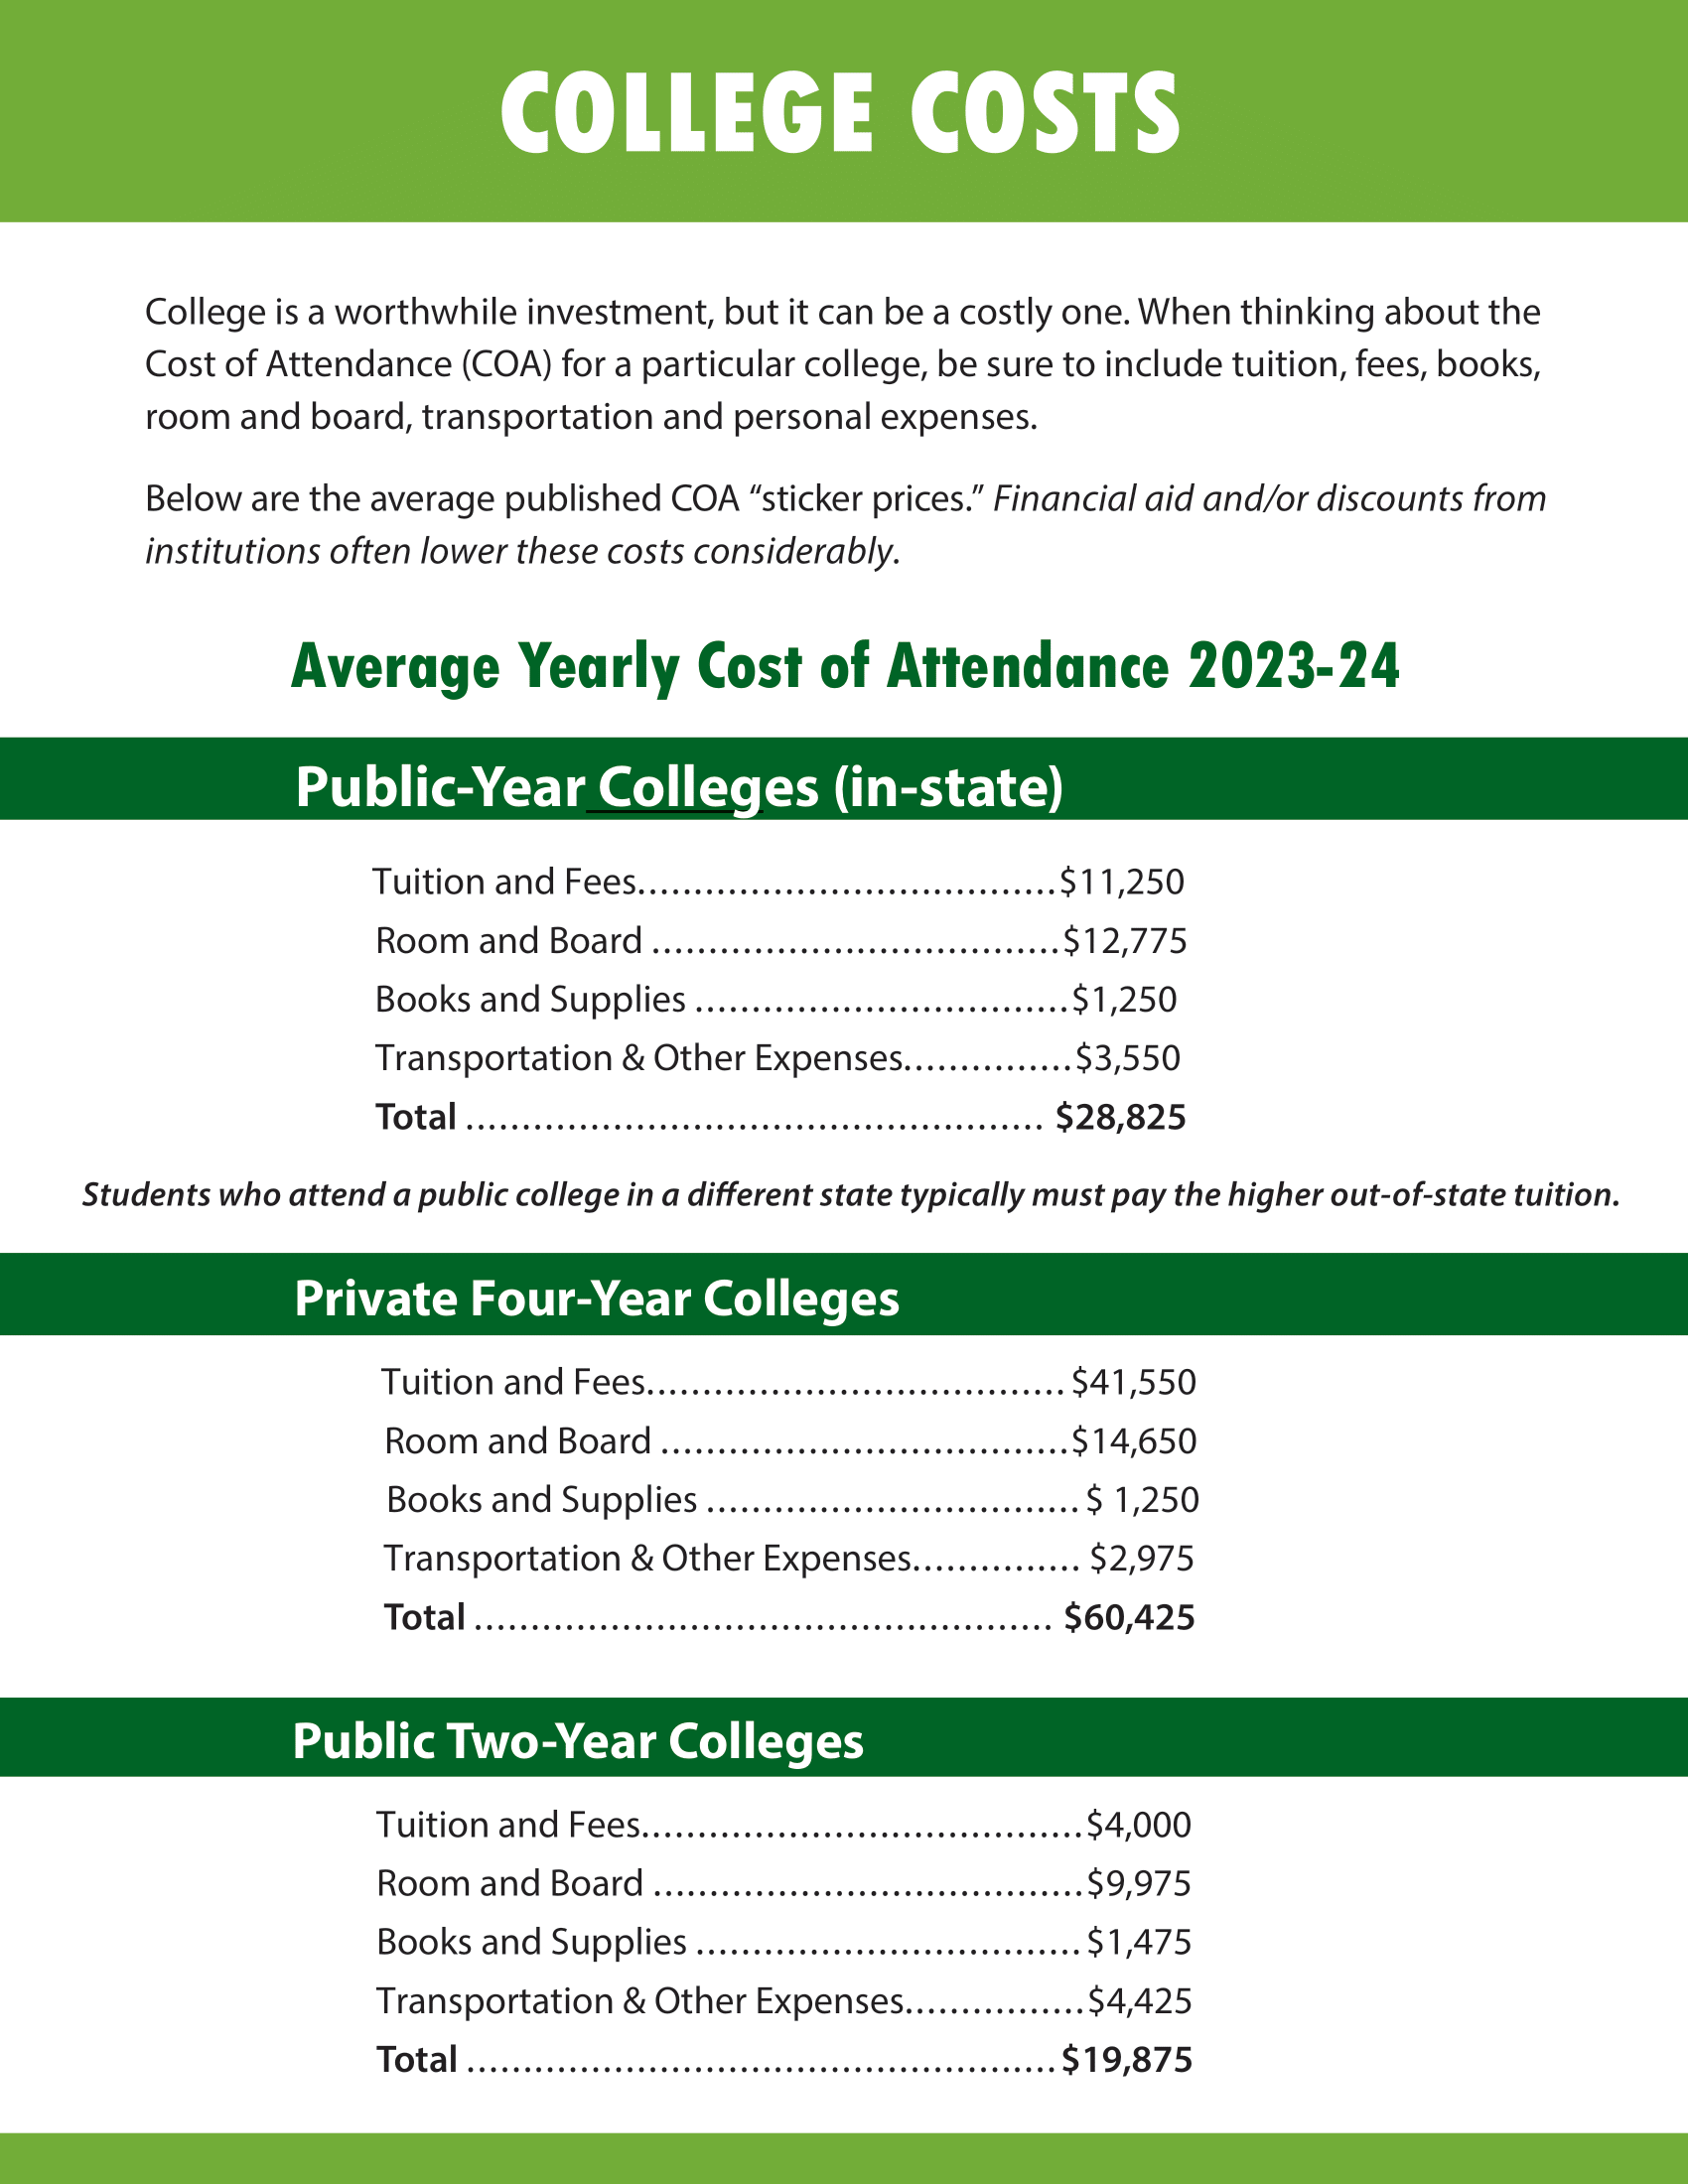 College Costs